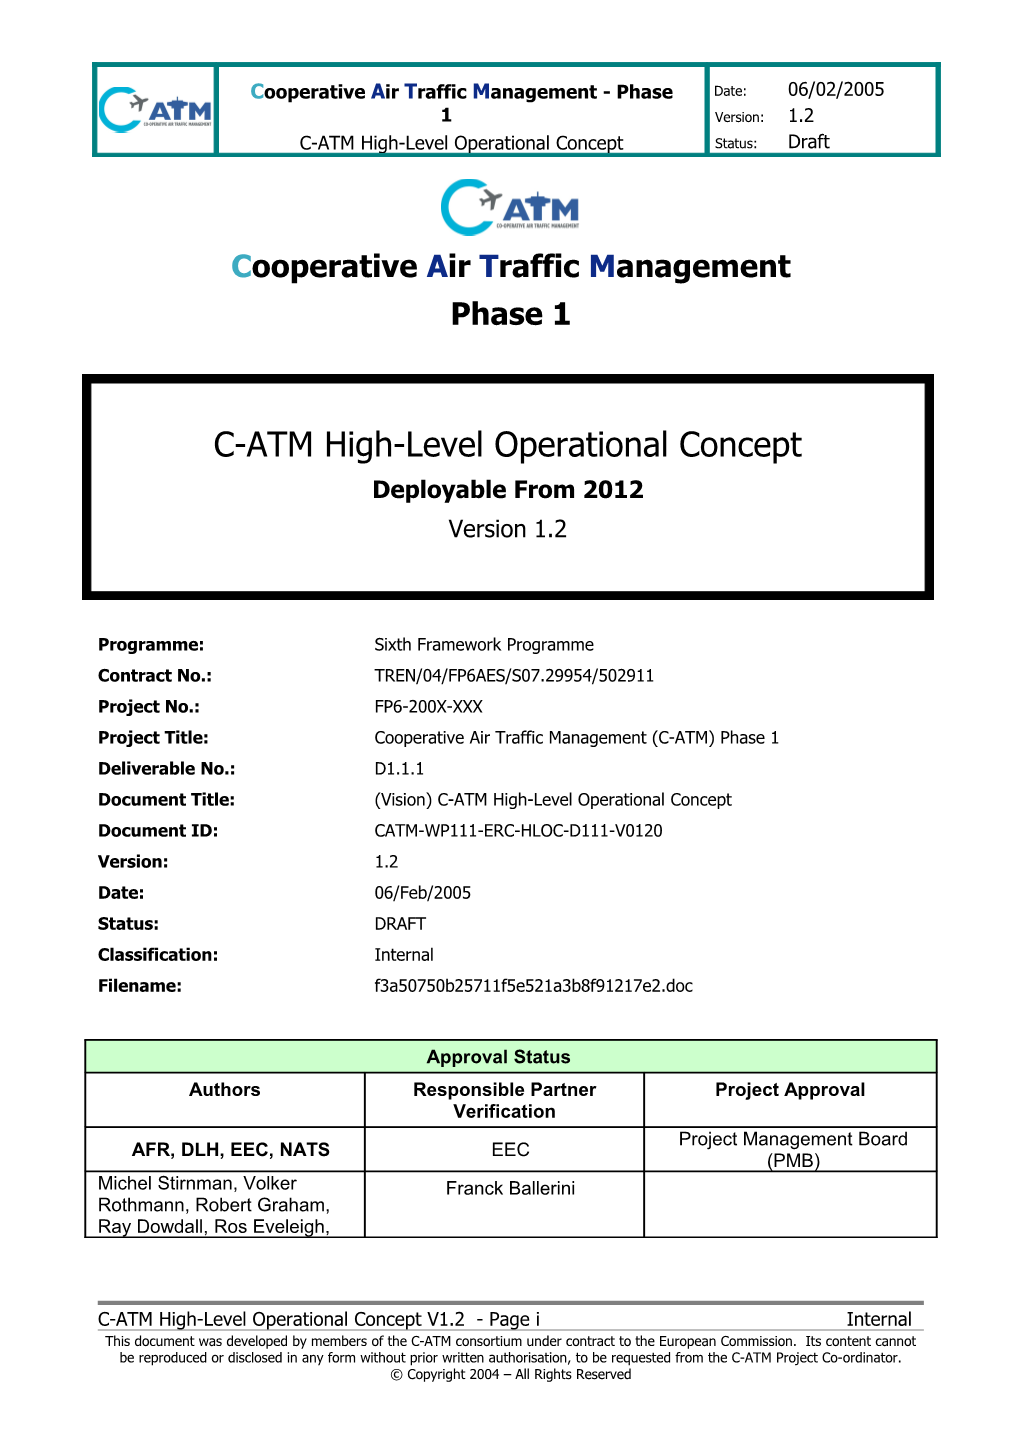 C-ATM High Level Operational Concept